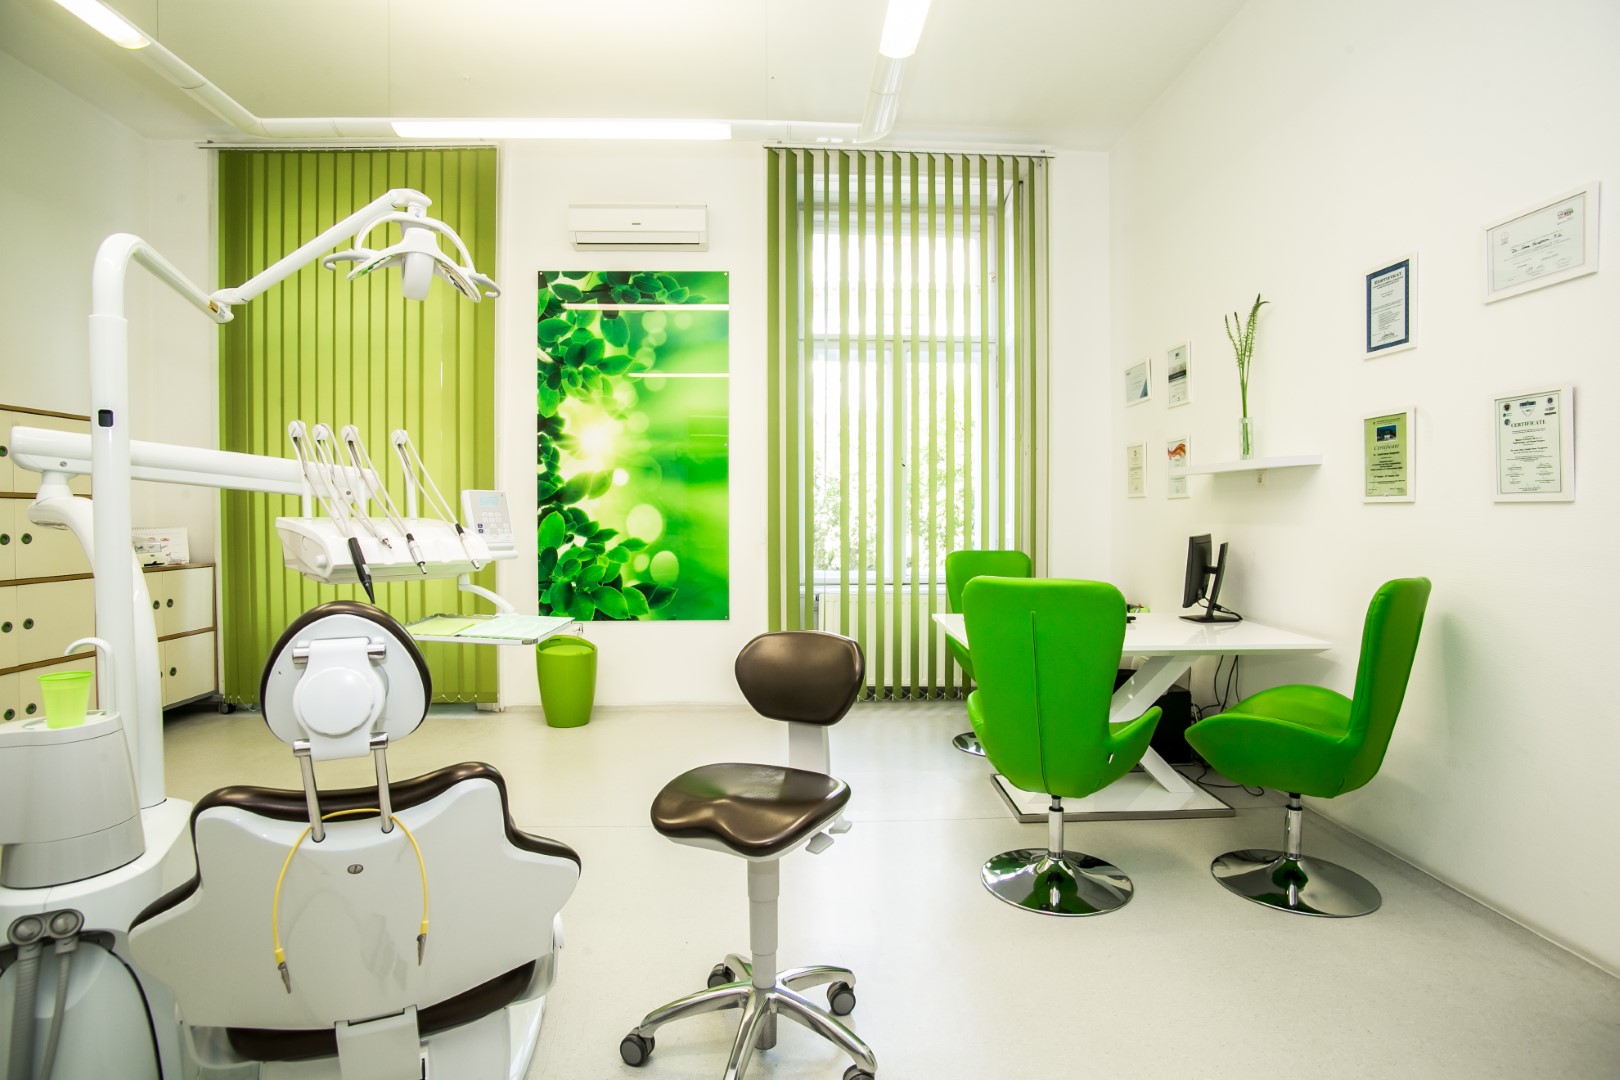 Introducing Evergreen Dental in Budapest - More Than Dentistry